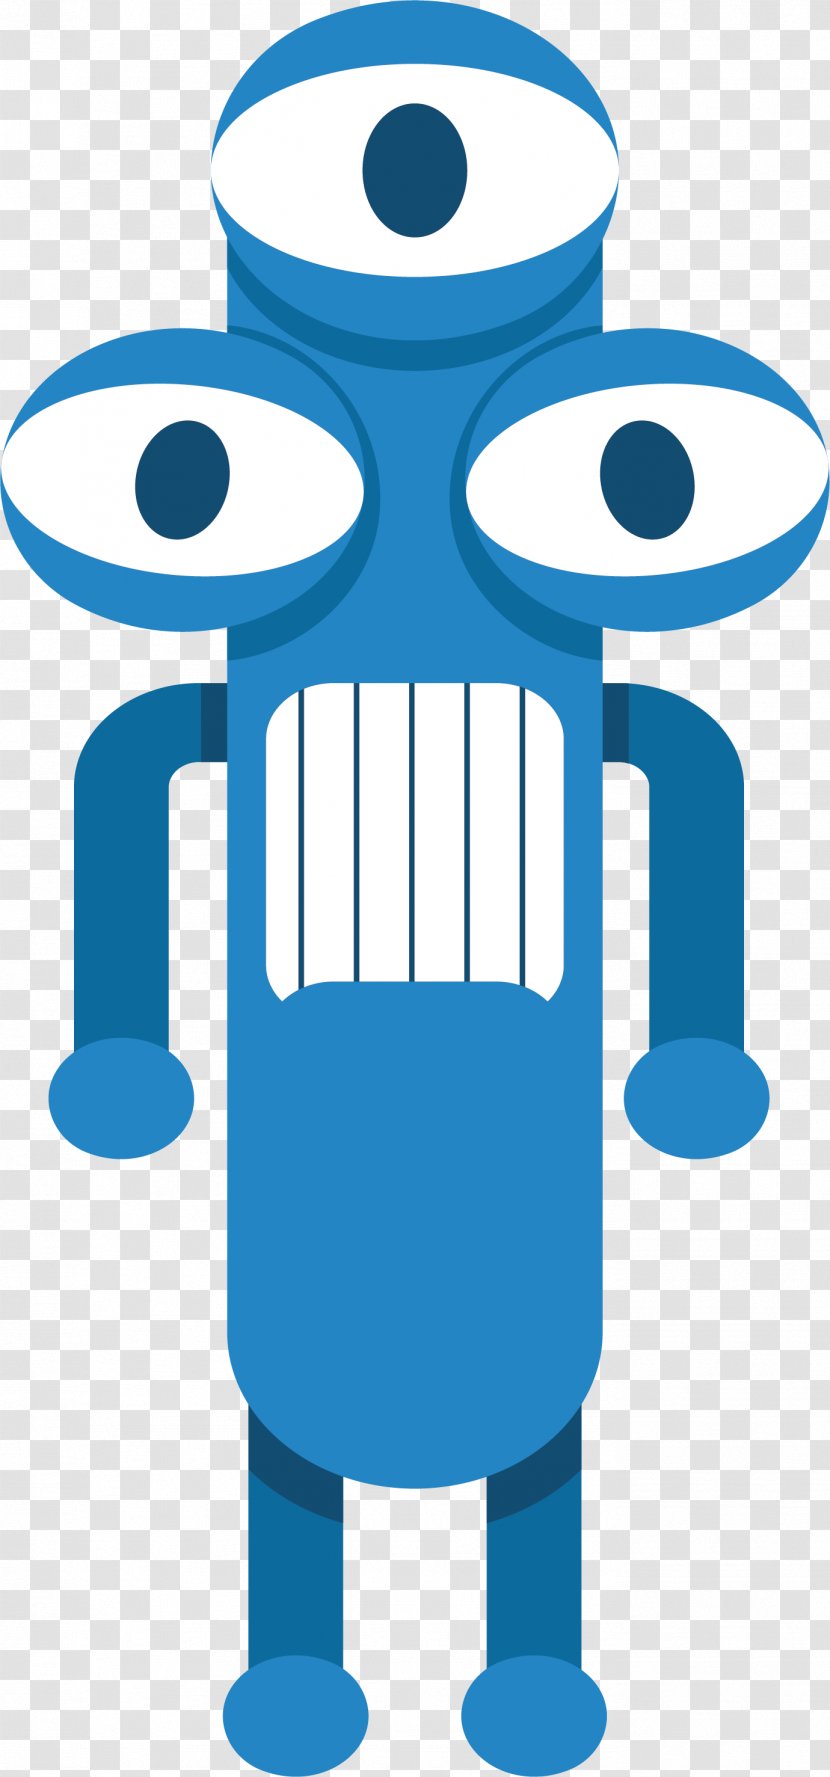 Blue Clip Art - Symbol - The Three Eyed Monster In Transparent PNG